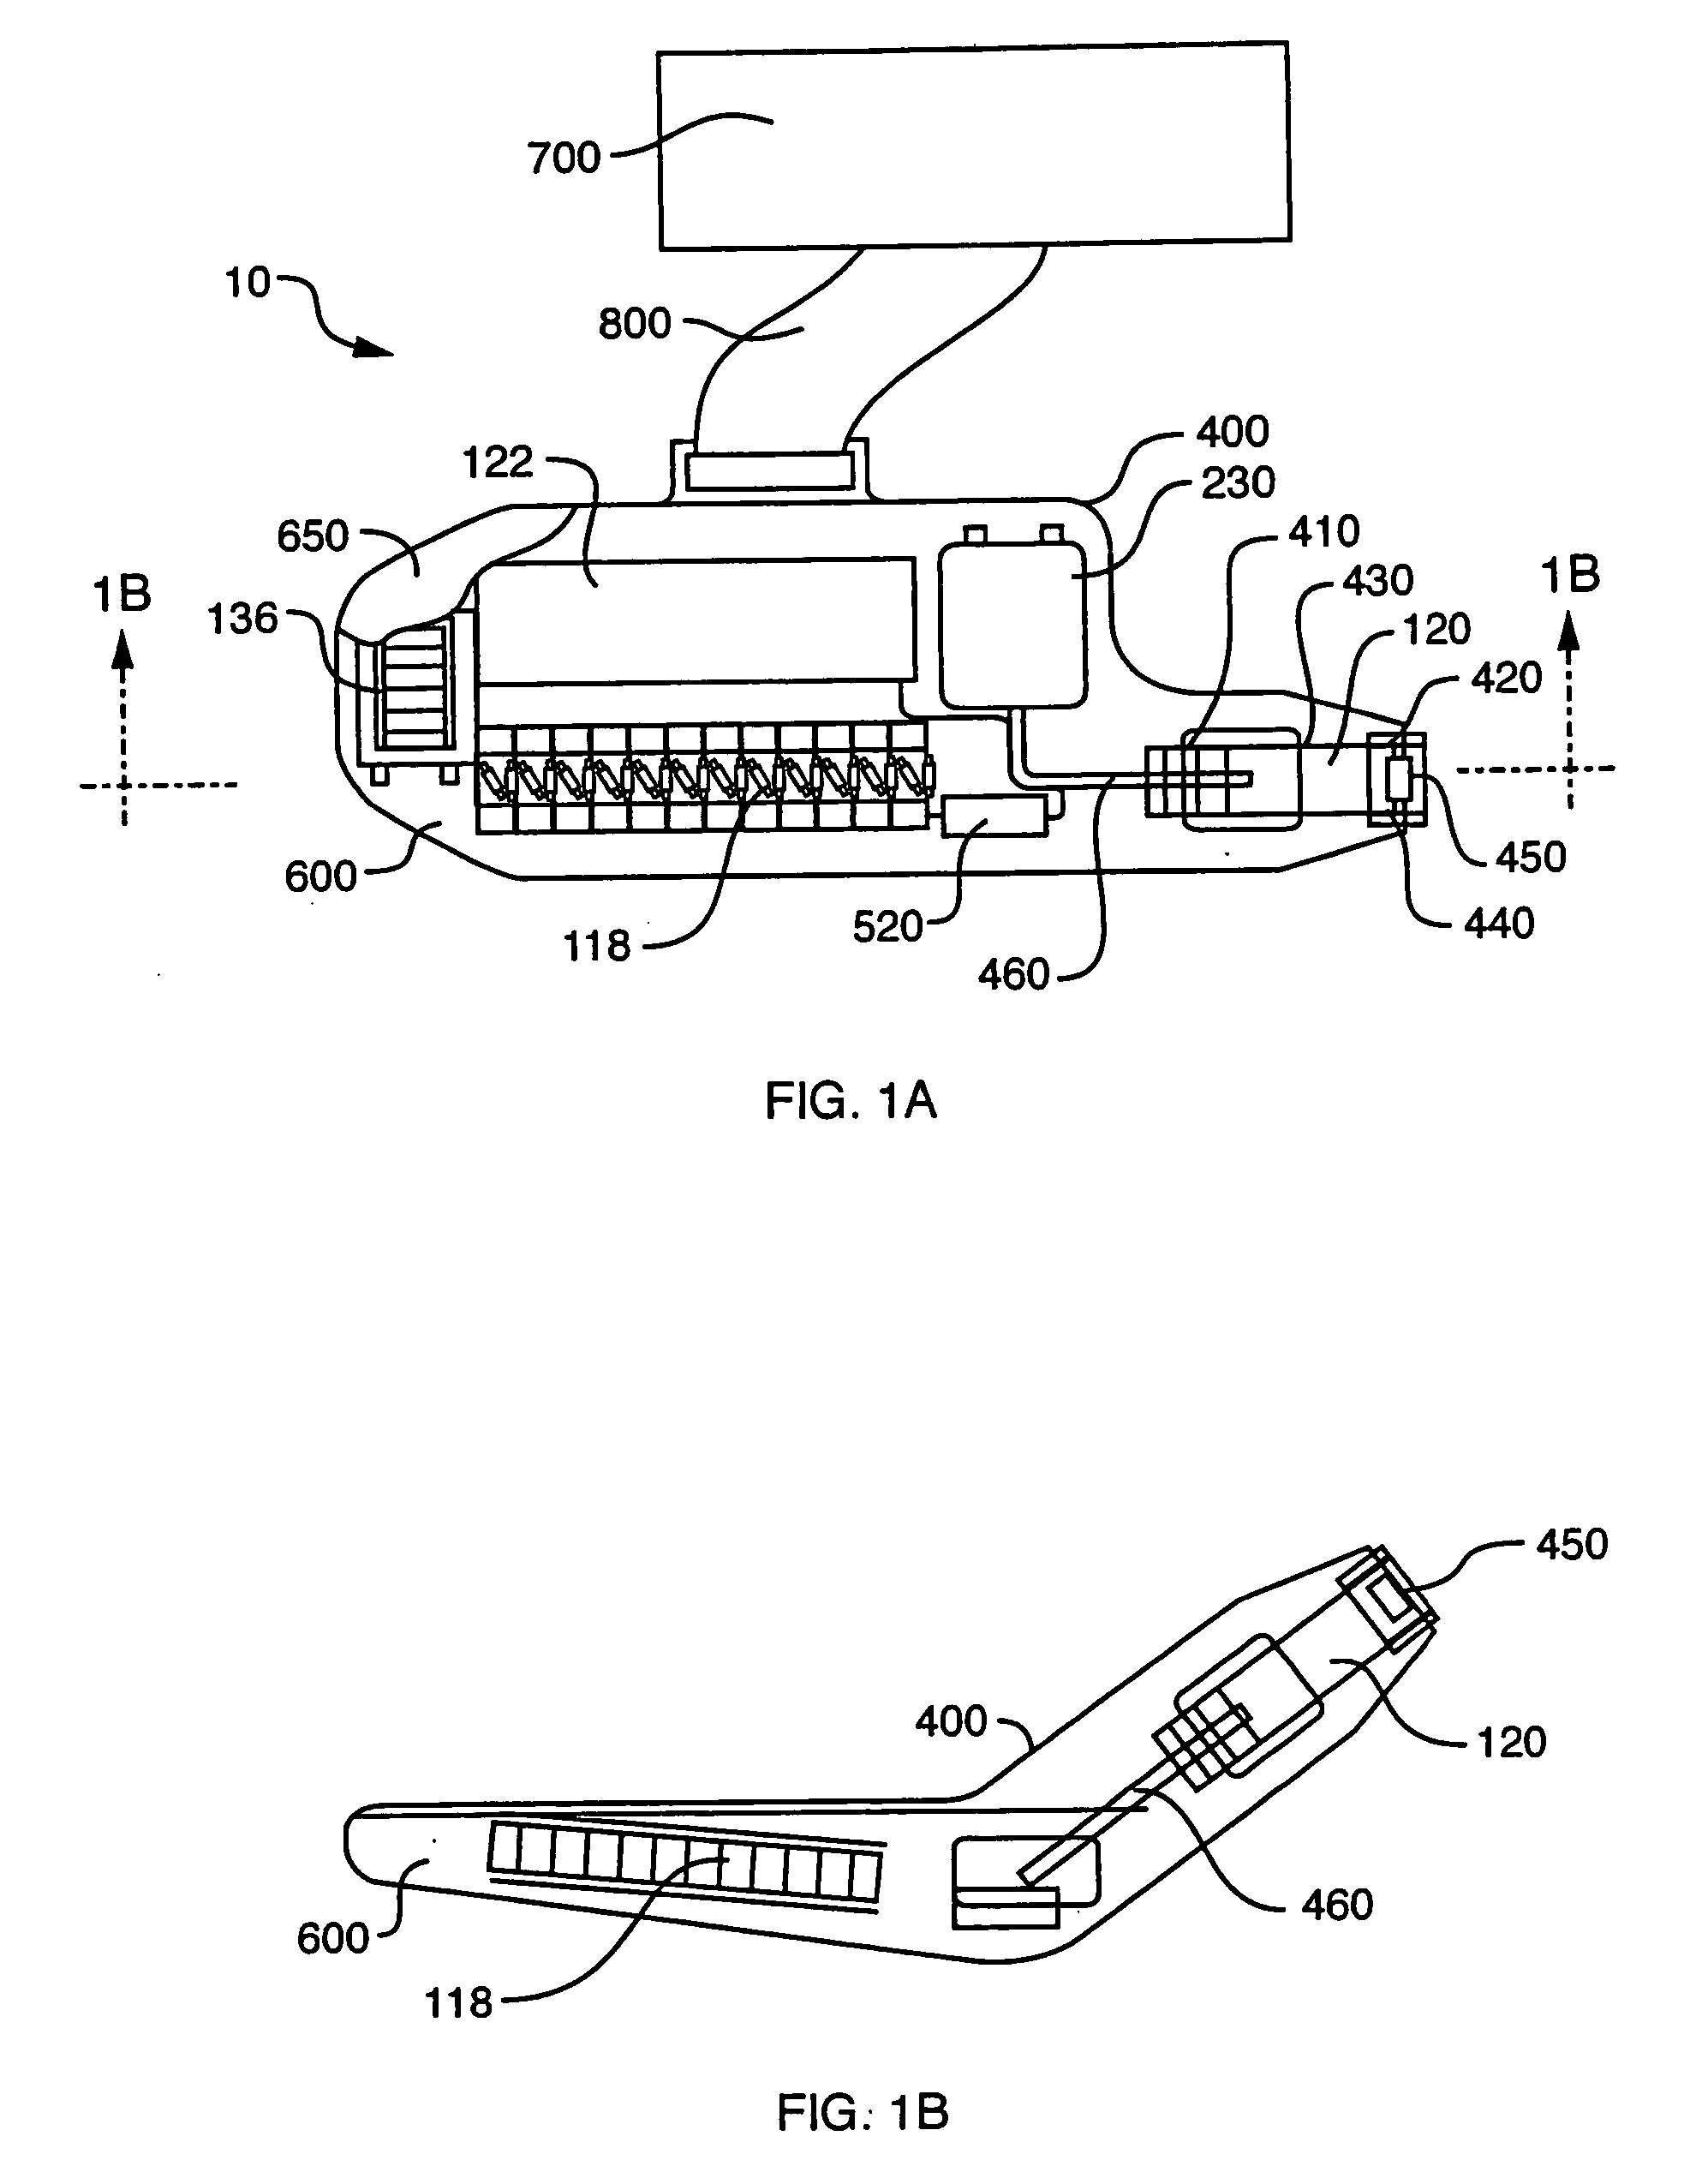 Integrated X-ray source module